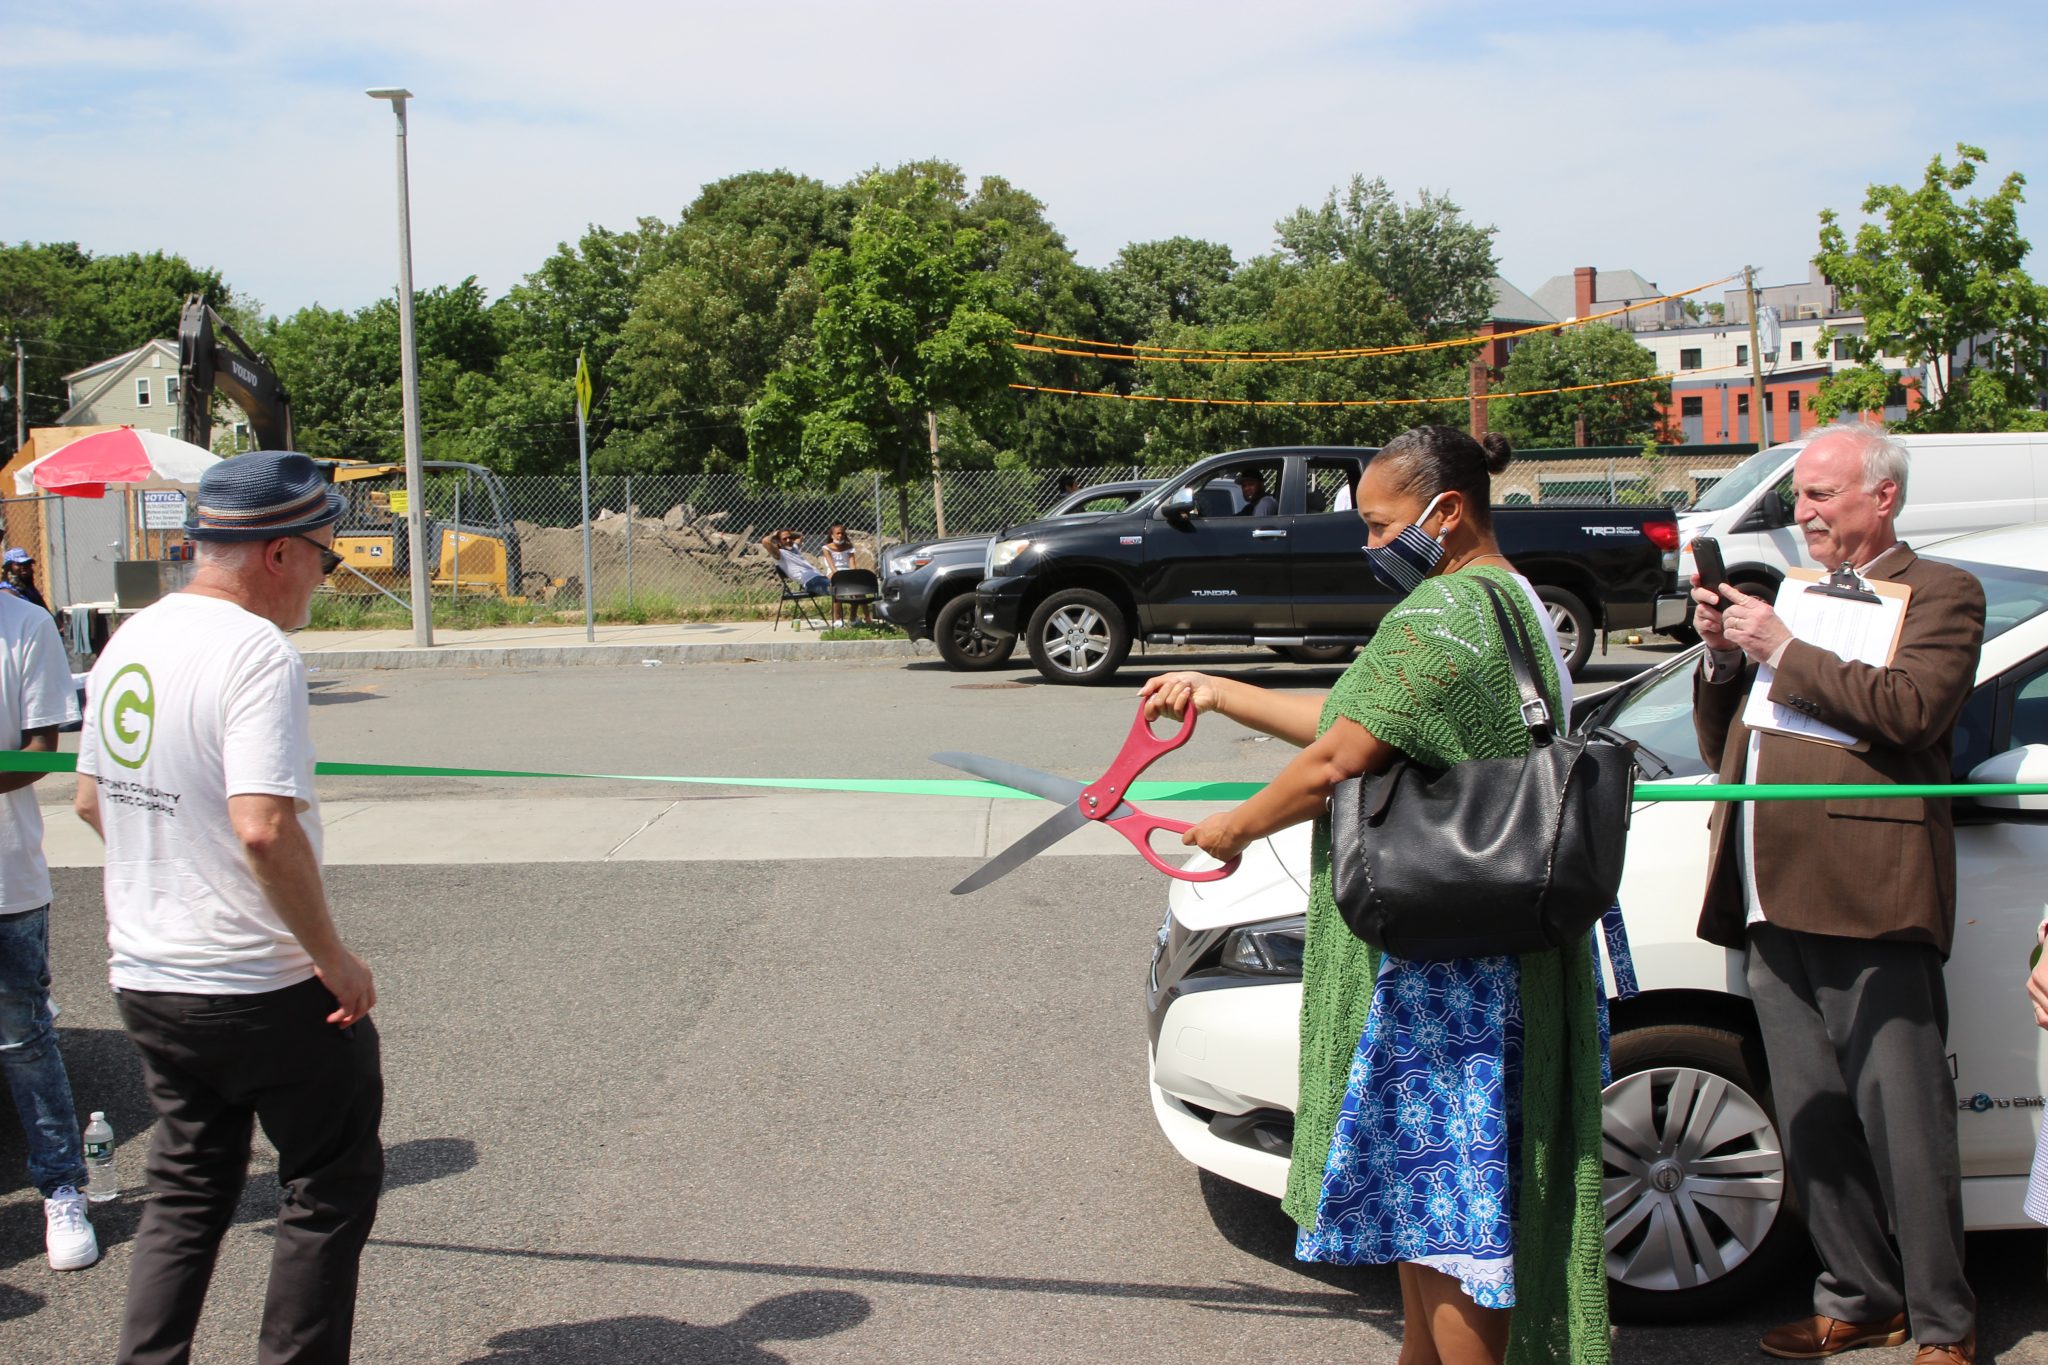 Reverend Mariama White-Hammond, Boston's Chief of Environment, uses a large pair of scissors to cut a green ribbon in front of a white vehicle.